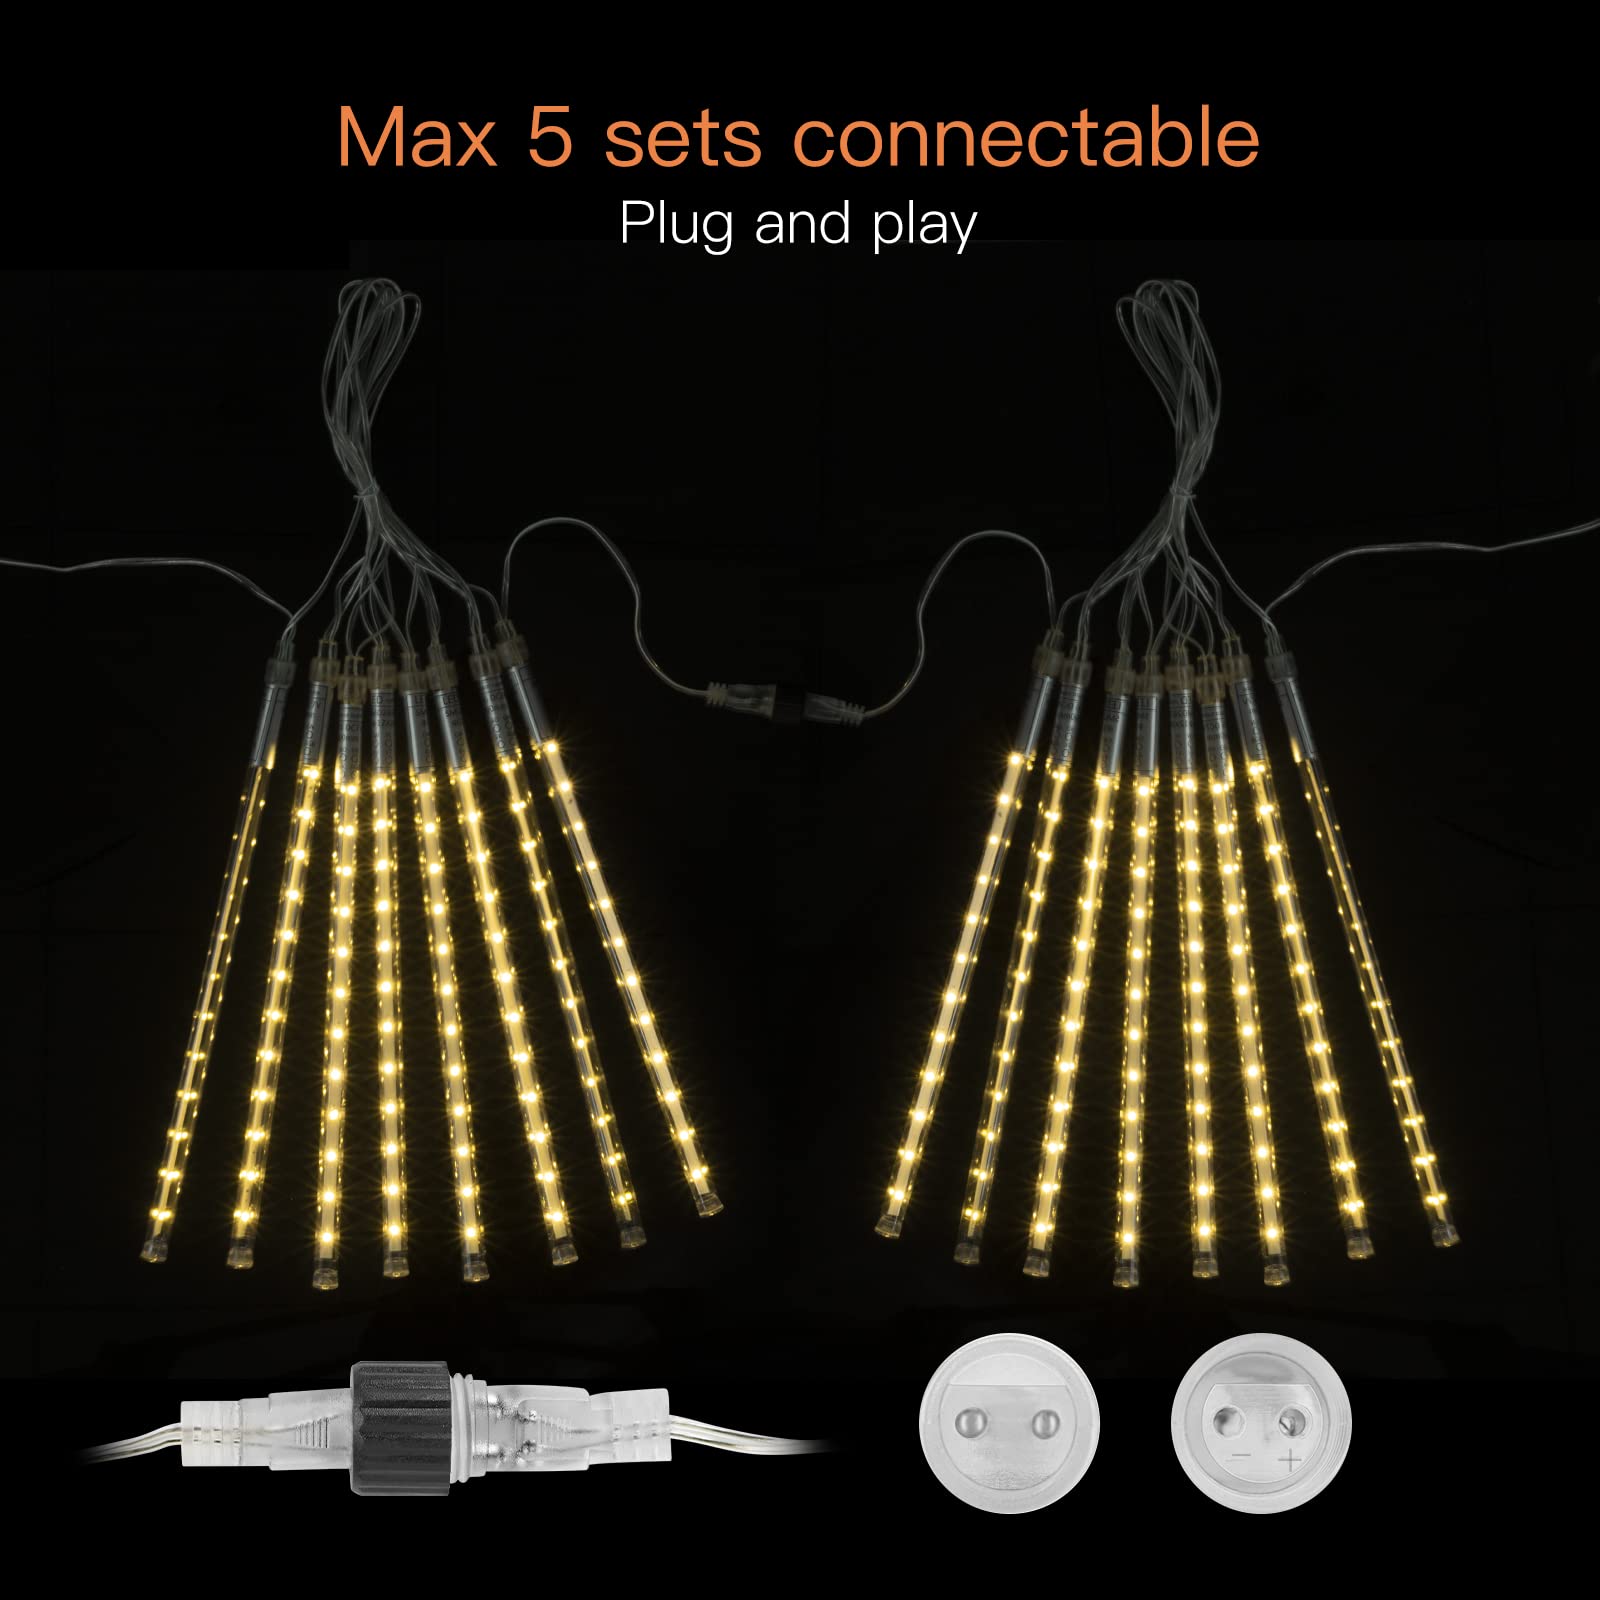 Meteor Shower Rain Lights, 19Ft 8 Tube 192 LEDs Christmas Lights Icicles, Icicle Lights Outdoor for Christmas Trees, Christmas Decoration Lights for Patio Garden Lawn Outdoor $9.99